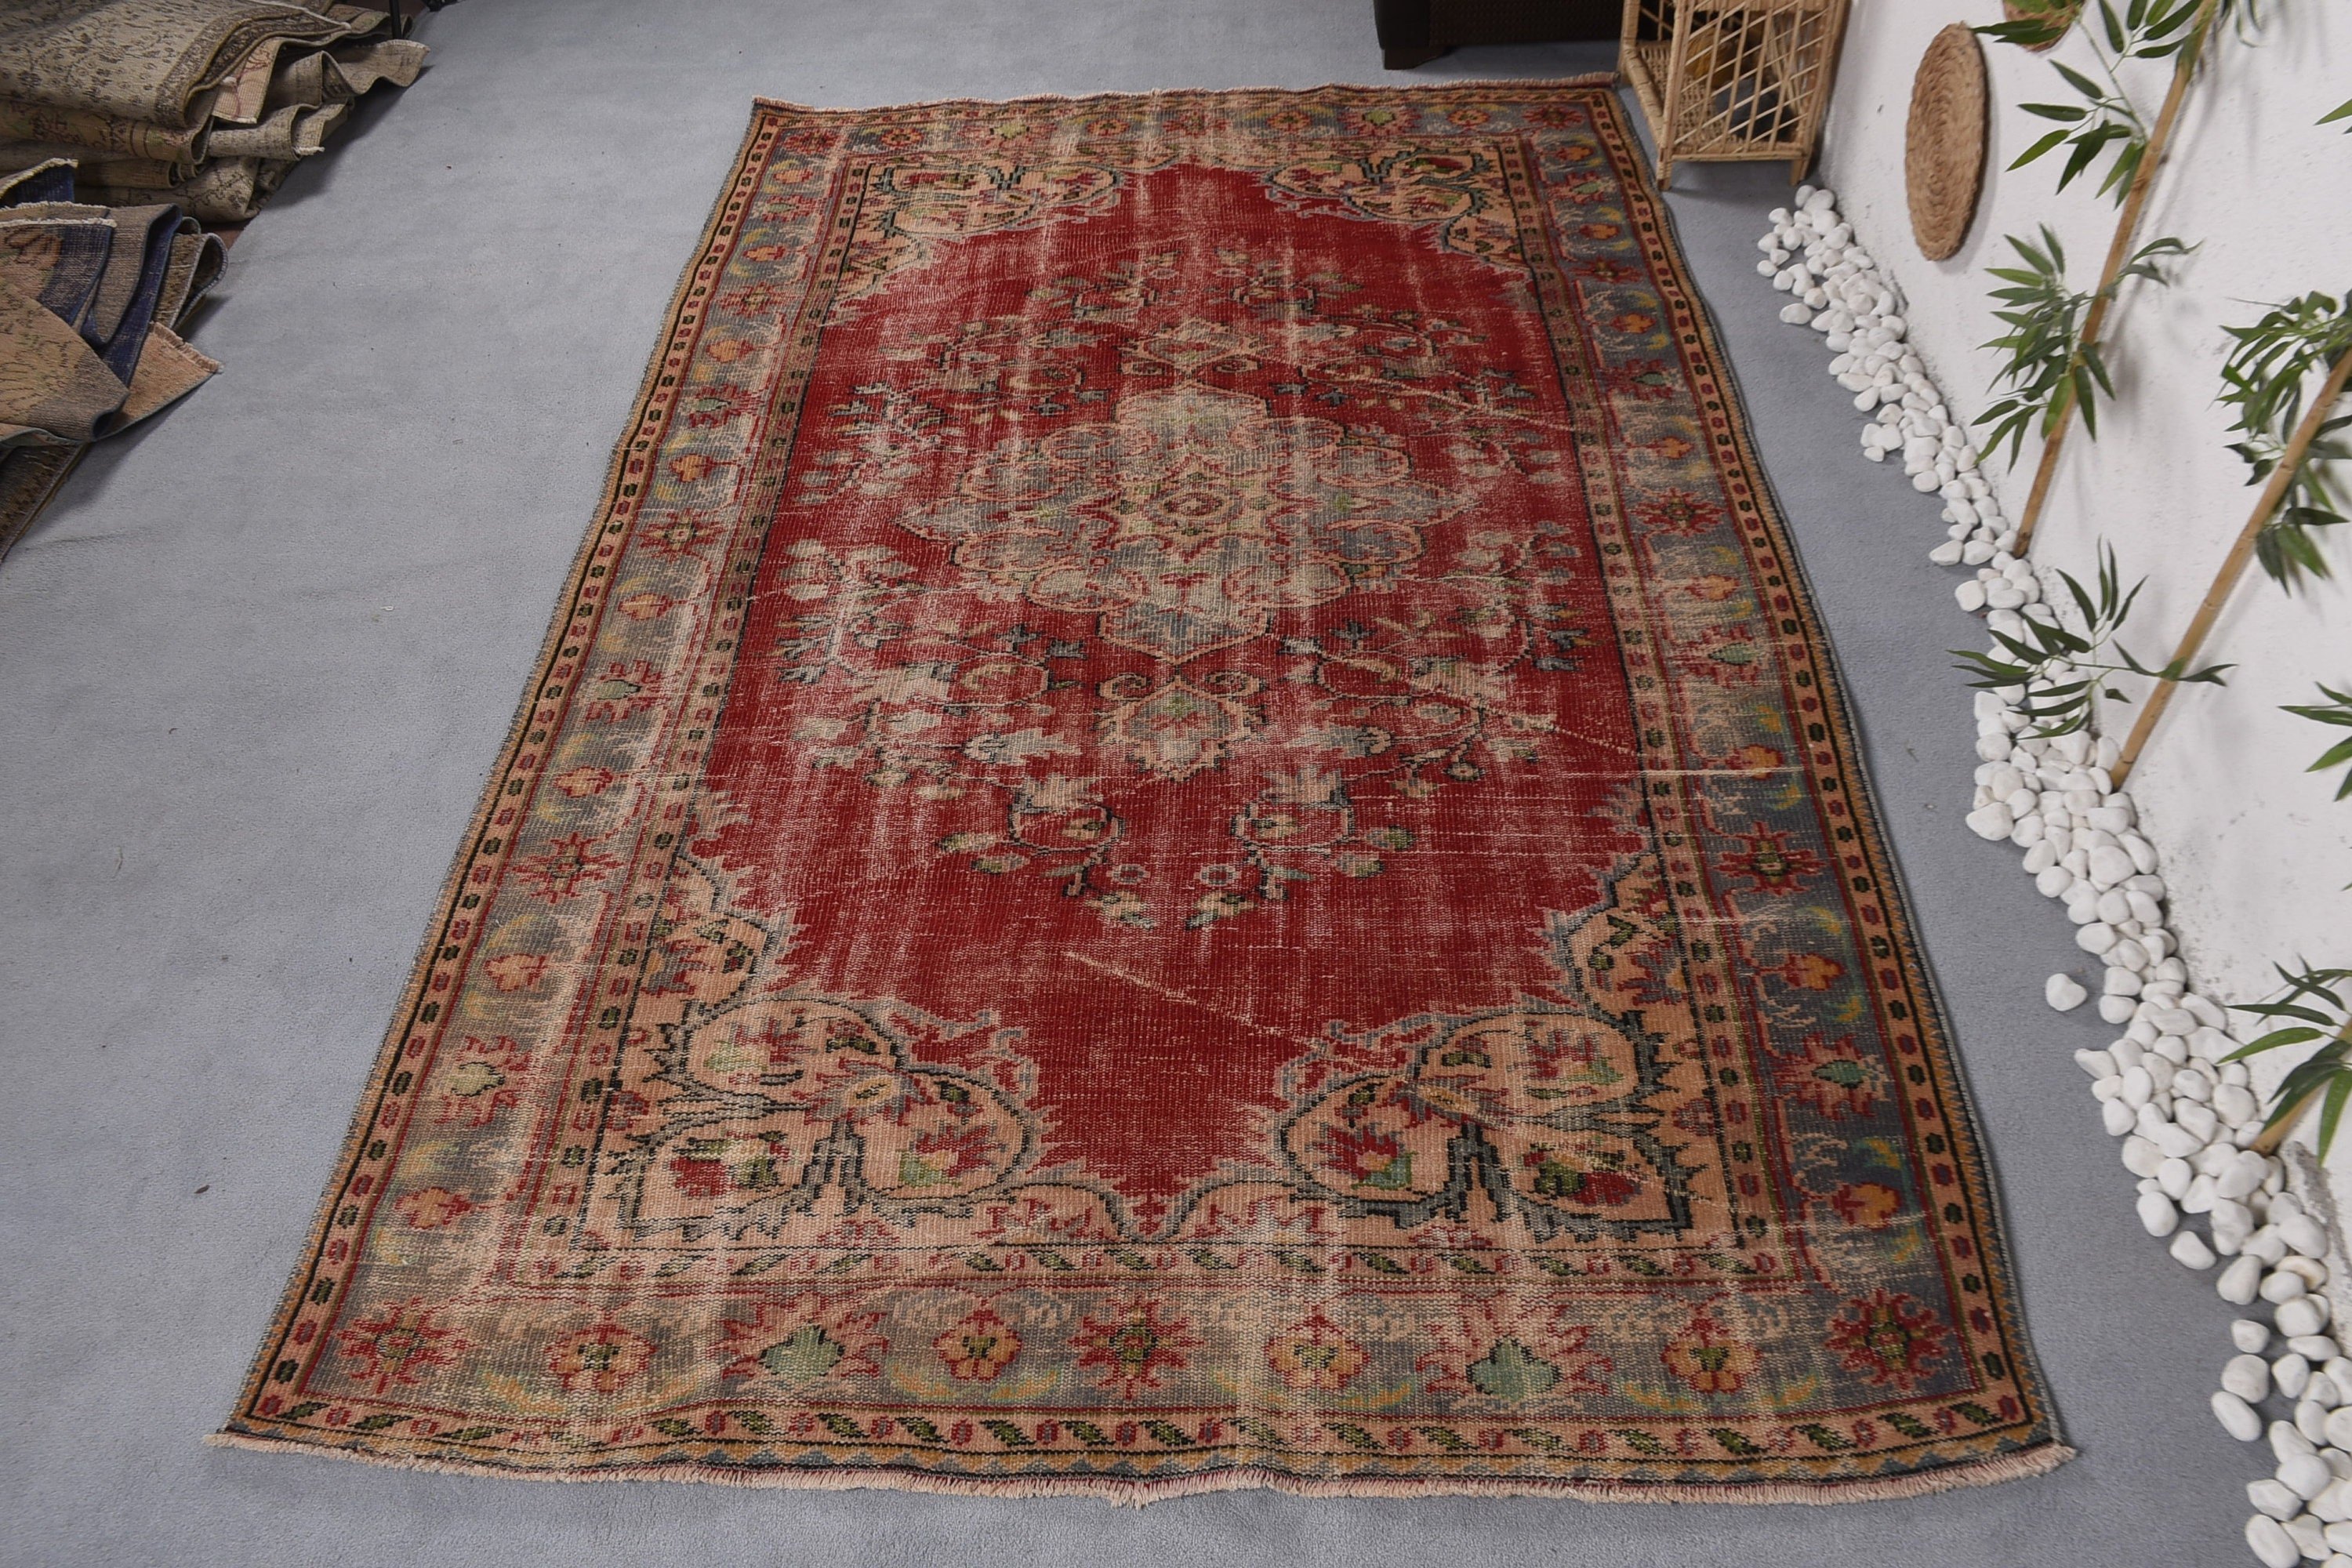 Aztec Rugs, Vintage Rugs, Salon Rugs, Moroccan Rug, 6.1x9.6 ft Large Rug, Dining Room Rug, Red Antique Rugs, Turkish Rugs